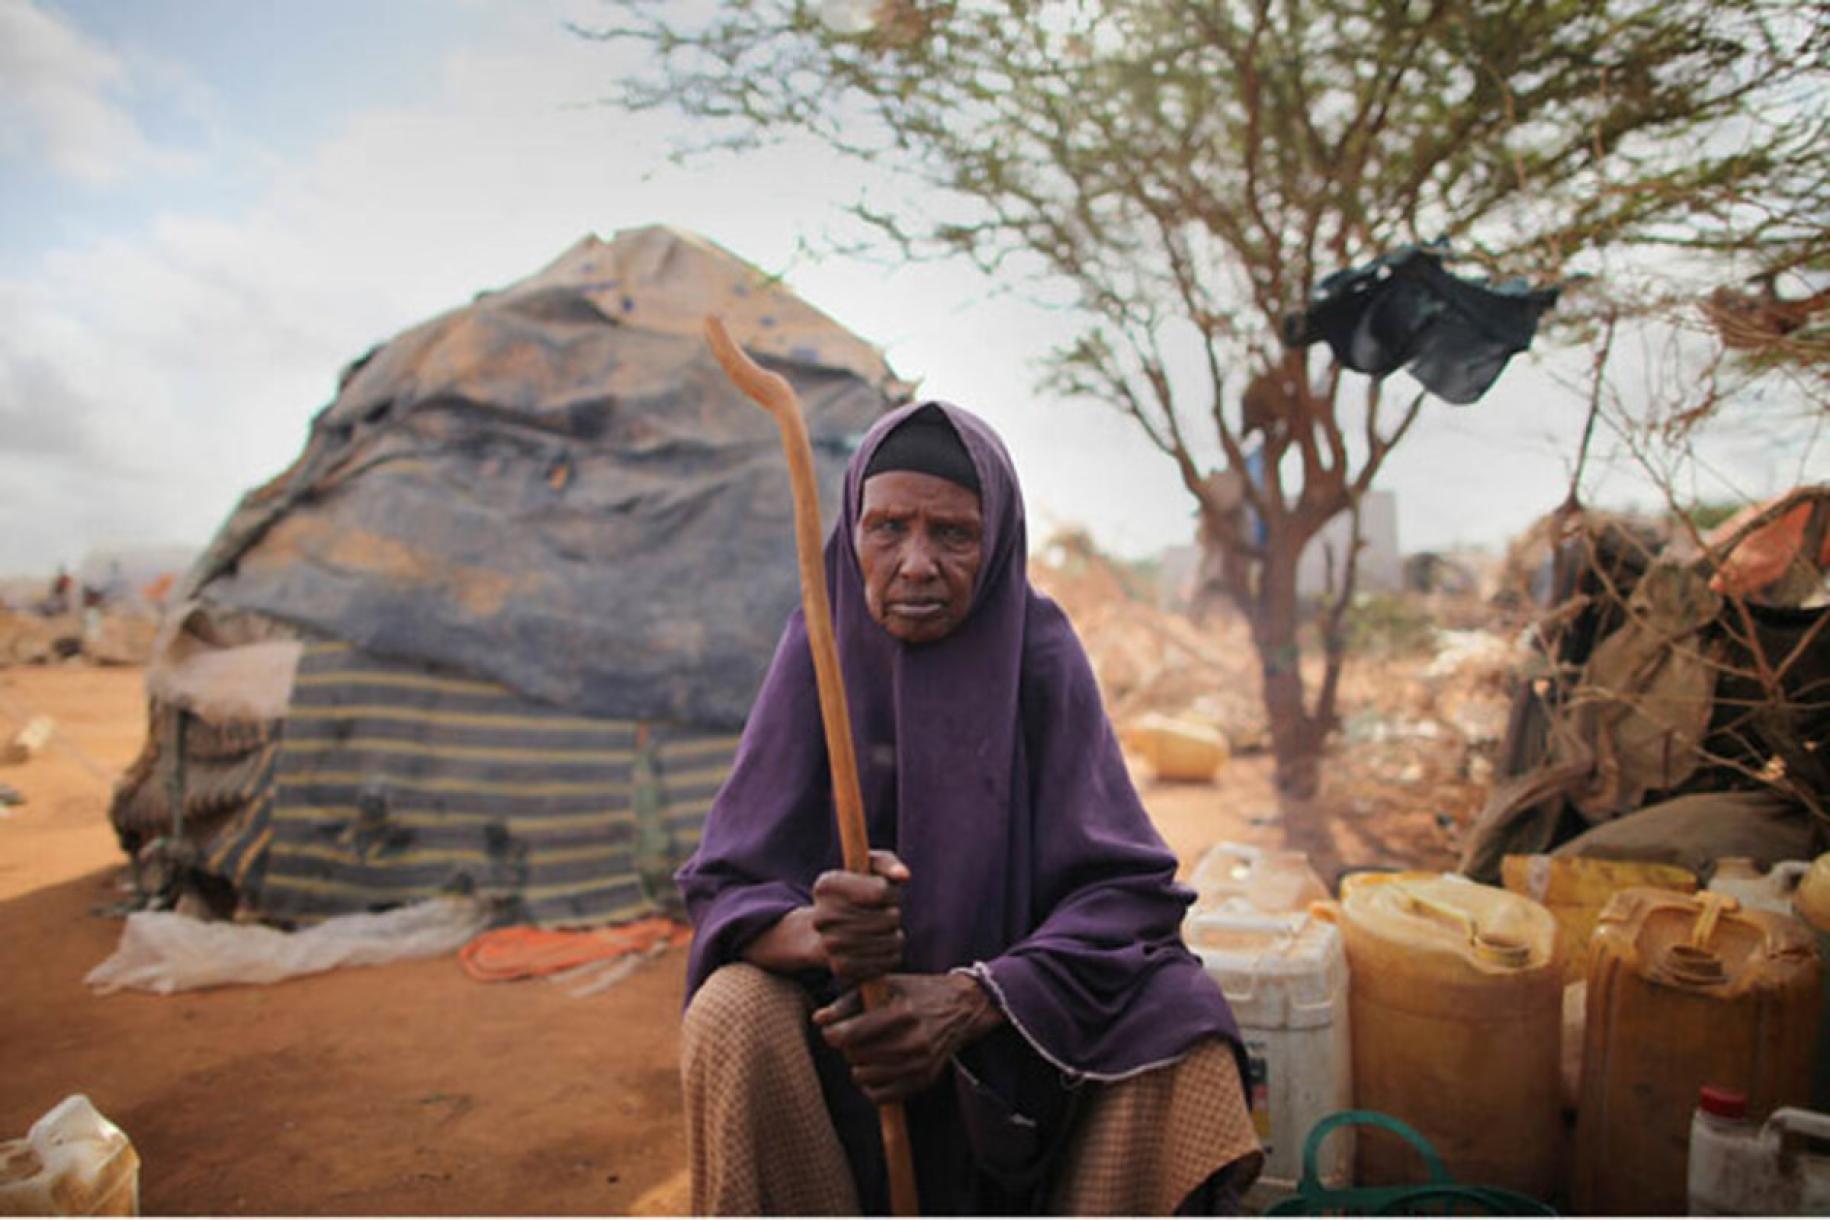 Older resident living in the Internally Displaced People camp sits outside a tent.